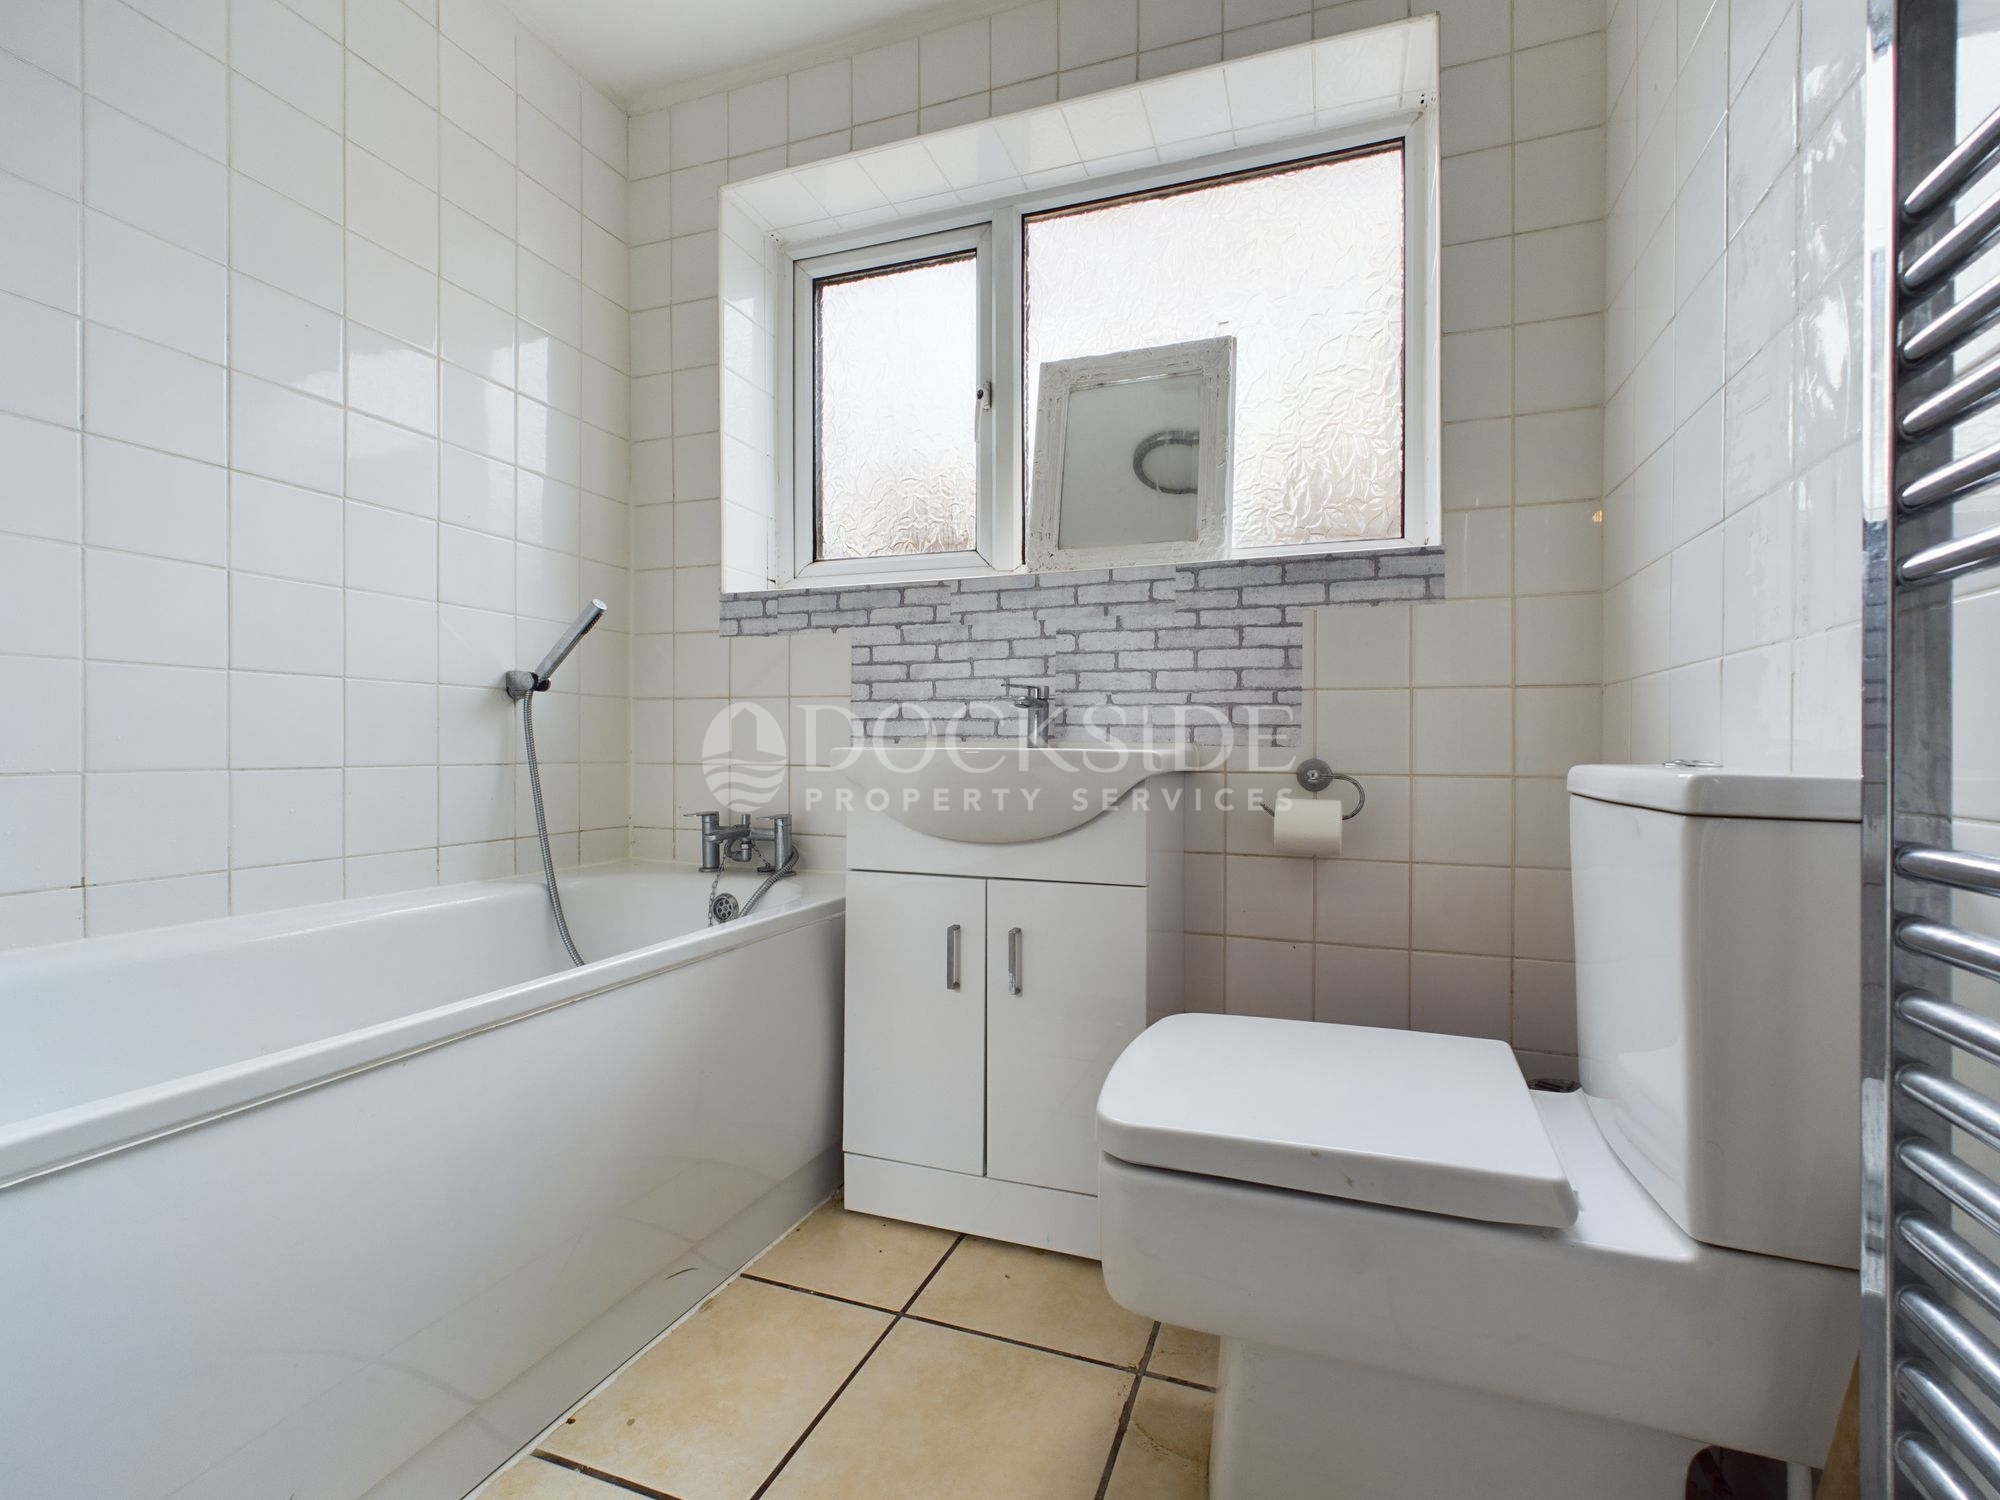 3 bed house to rent in Curzon Road, Chatham  - Property Image 6